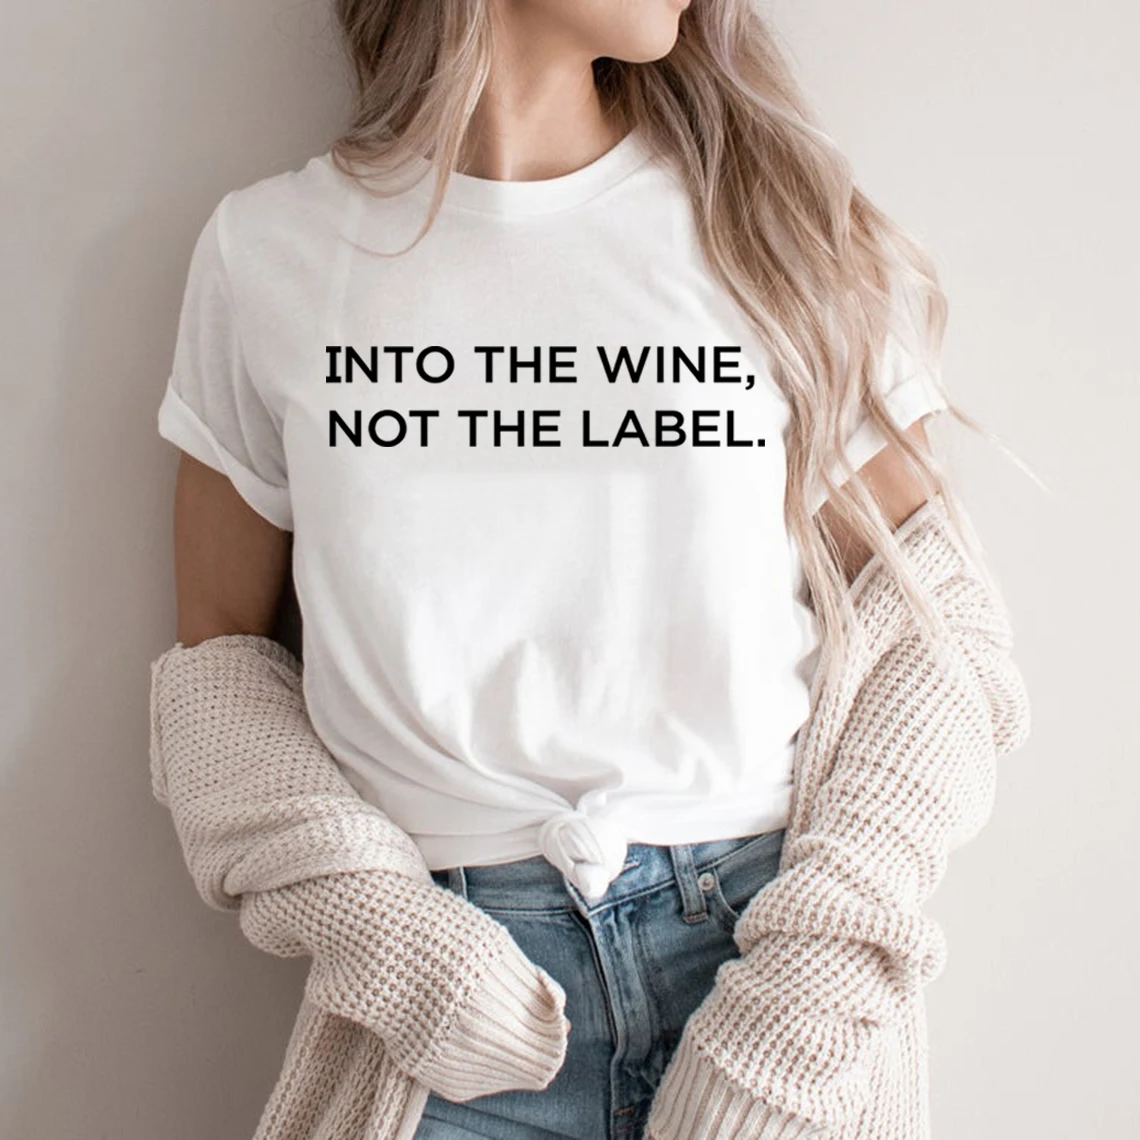 

Into The Wine Not The Label Shirt David Rose LGBTQ Pride Event Tshirt Dan Levy Fans Gift Shirt Unisex Summer Tops Graphic Tee